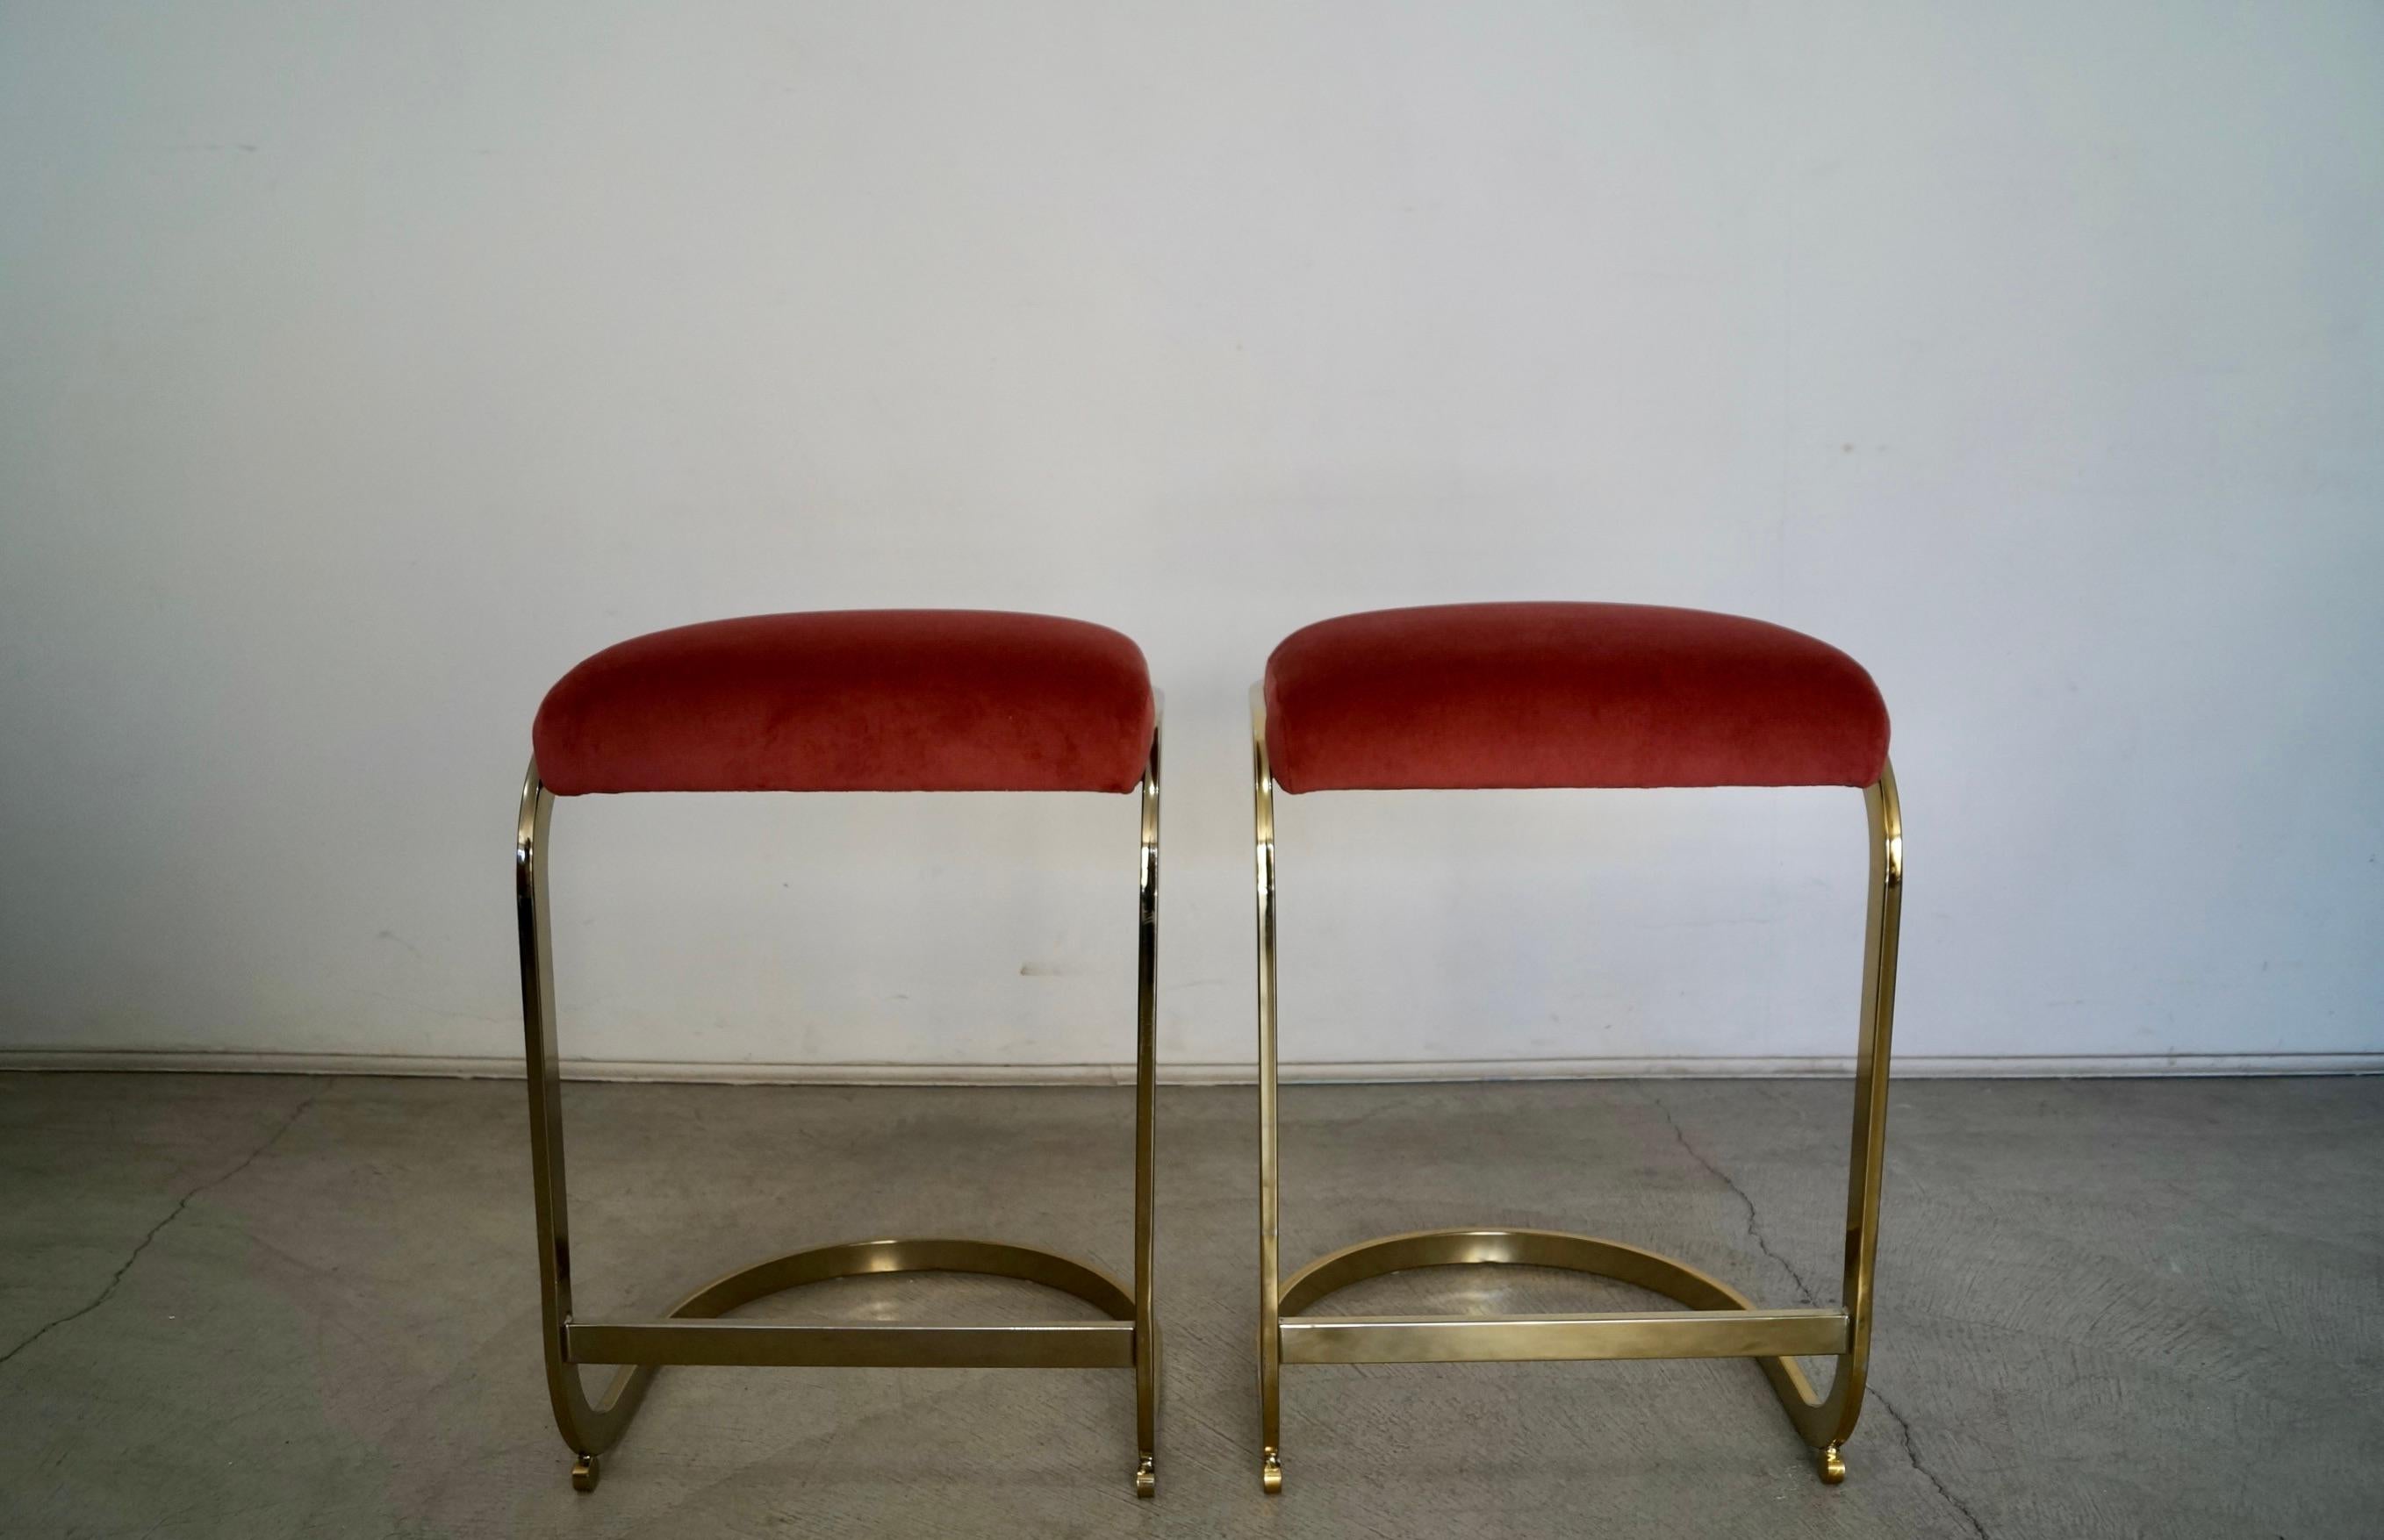 Pair of vintage 1970s Mid-Century Modern cantilever stools for sale. These have been professionally reupholstered in new pink velvet and foam. They have an elegant design in the manner of Milo Baughman designs. They have a cantilever frame in brass